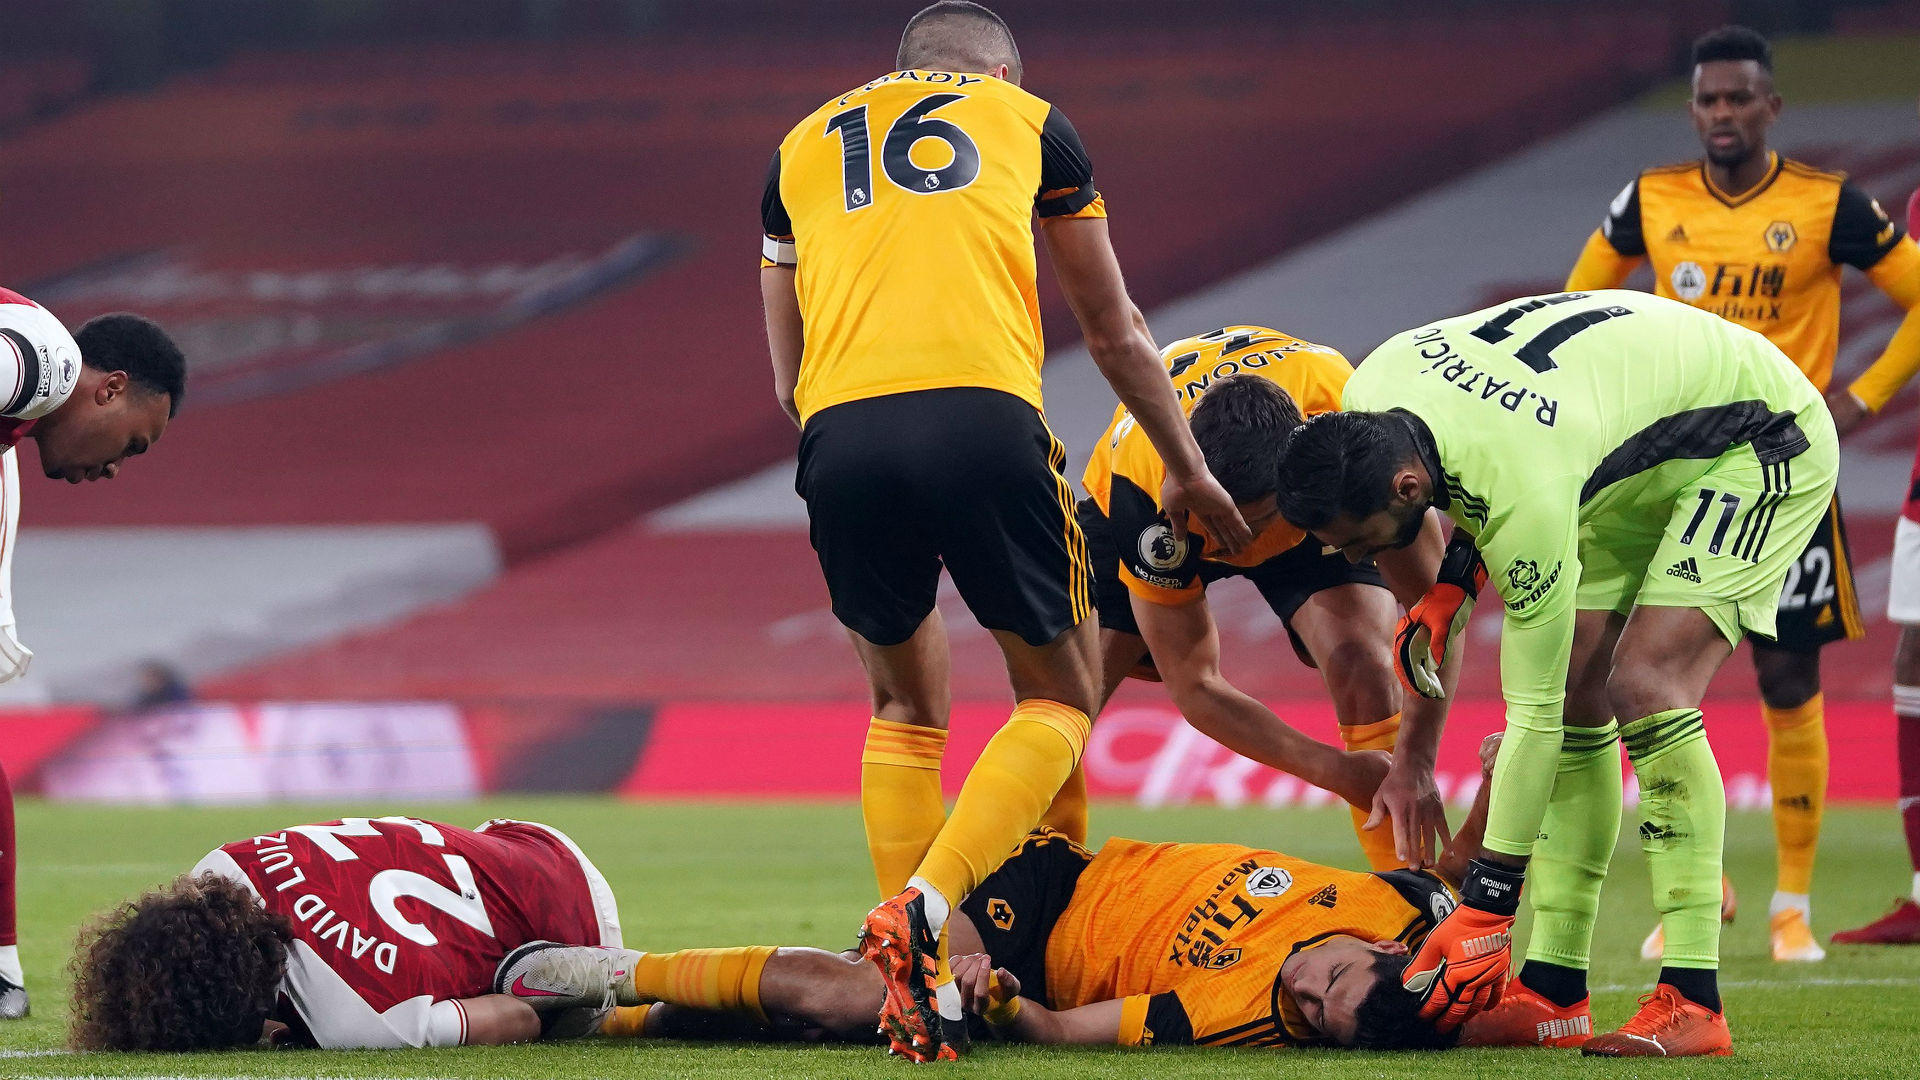 Wolves confirm Jimenez suffered fractured skull in clash of heads with David Luiz after Mexico striker undergoes operation